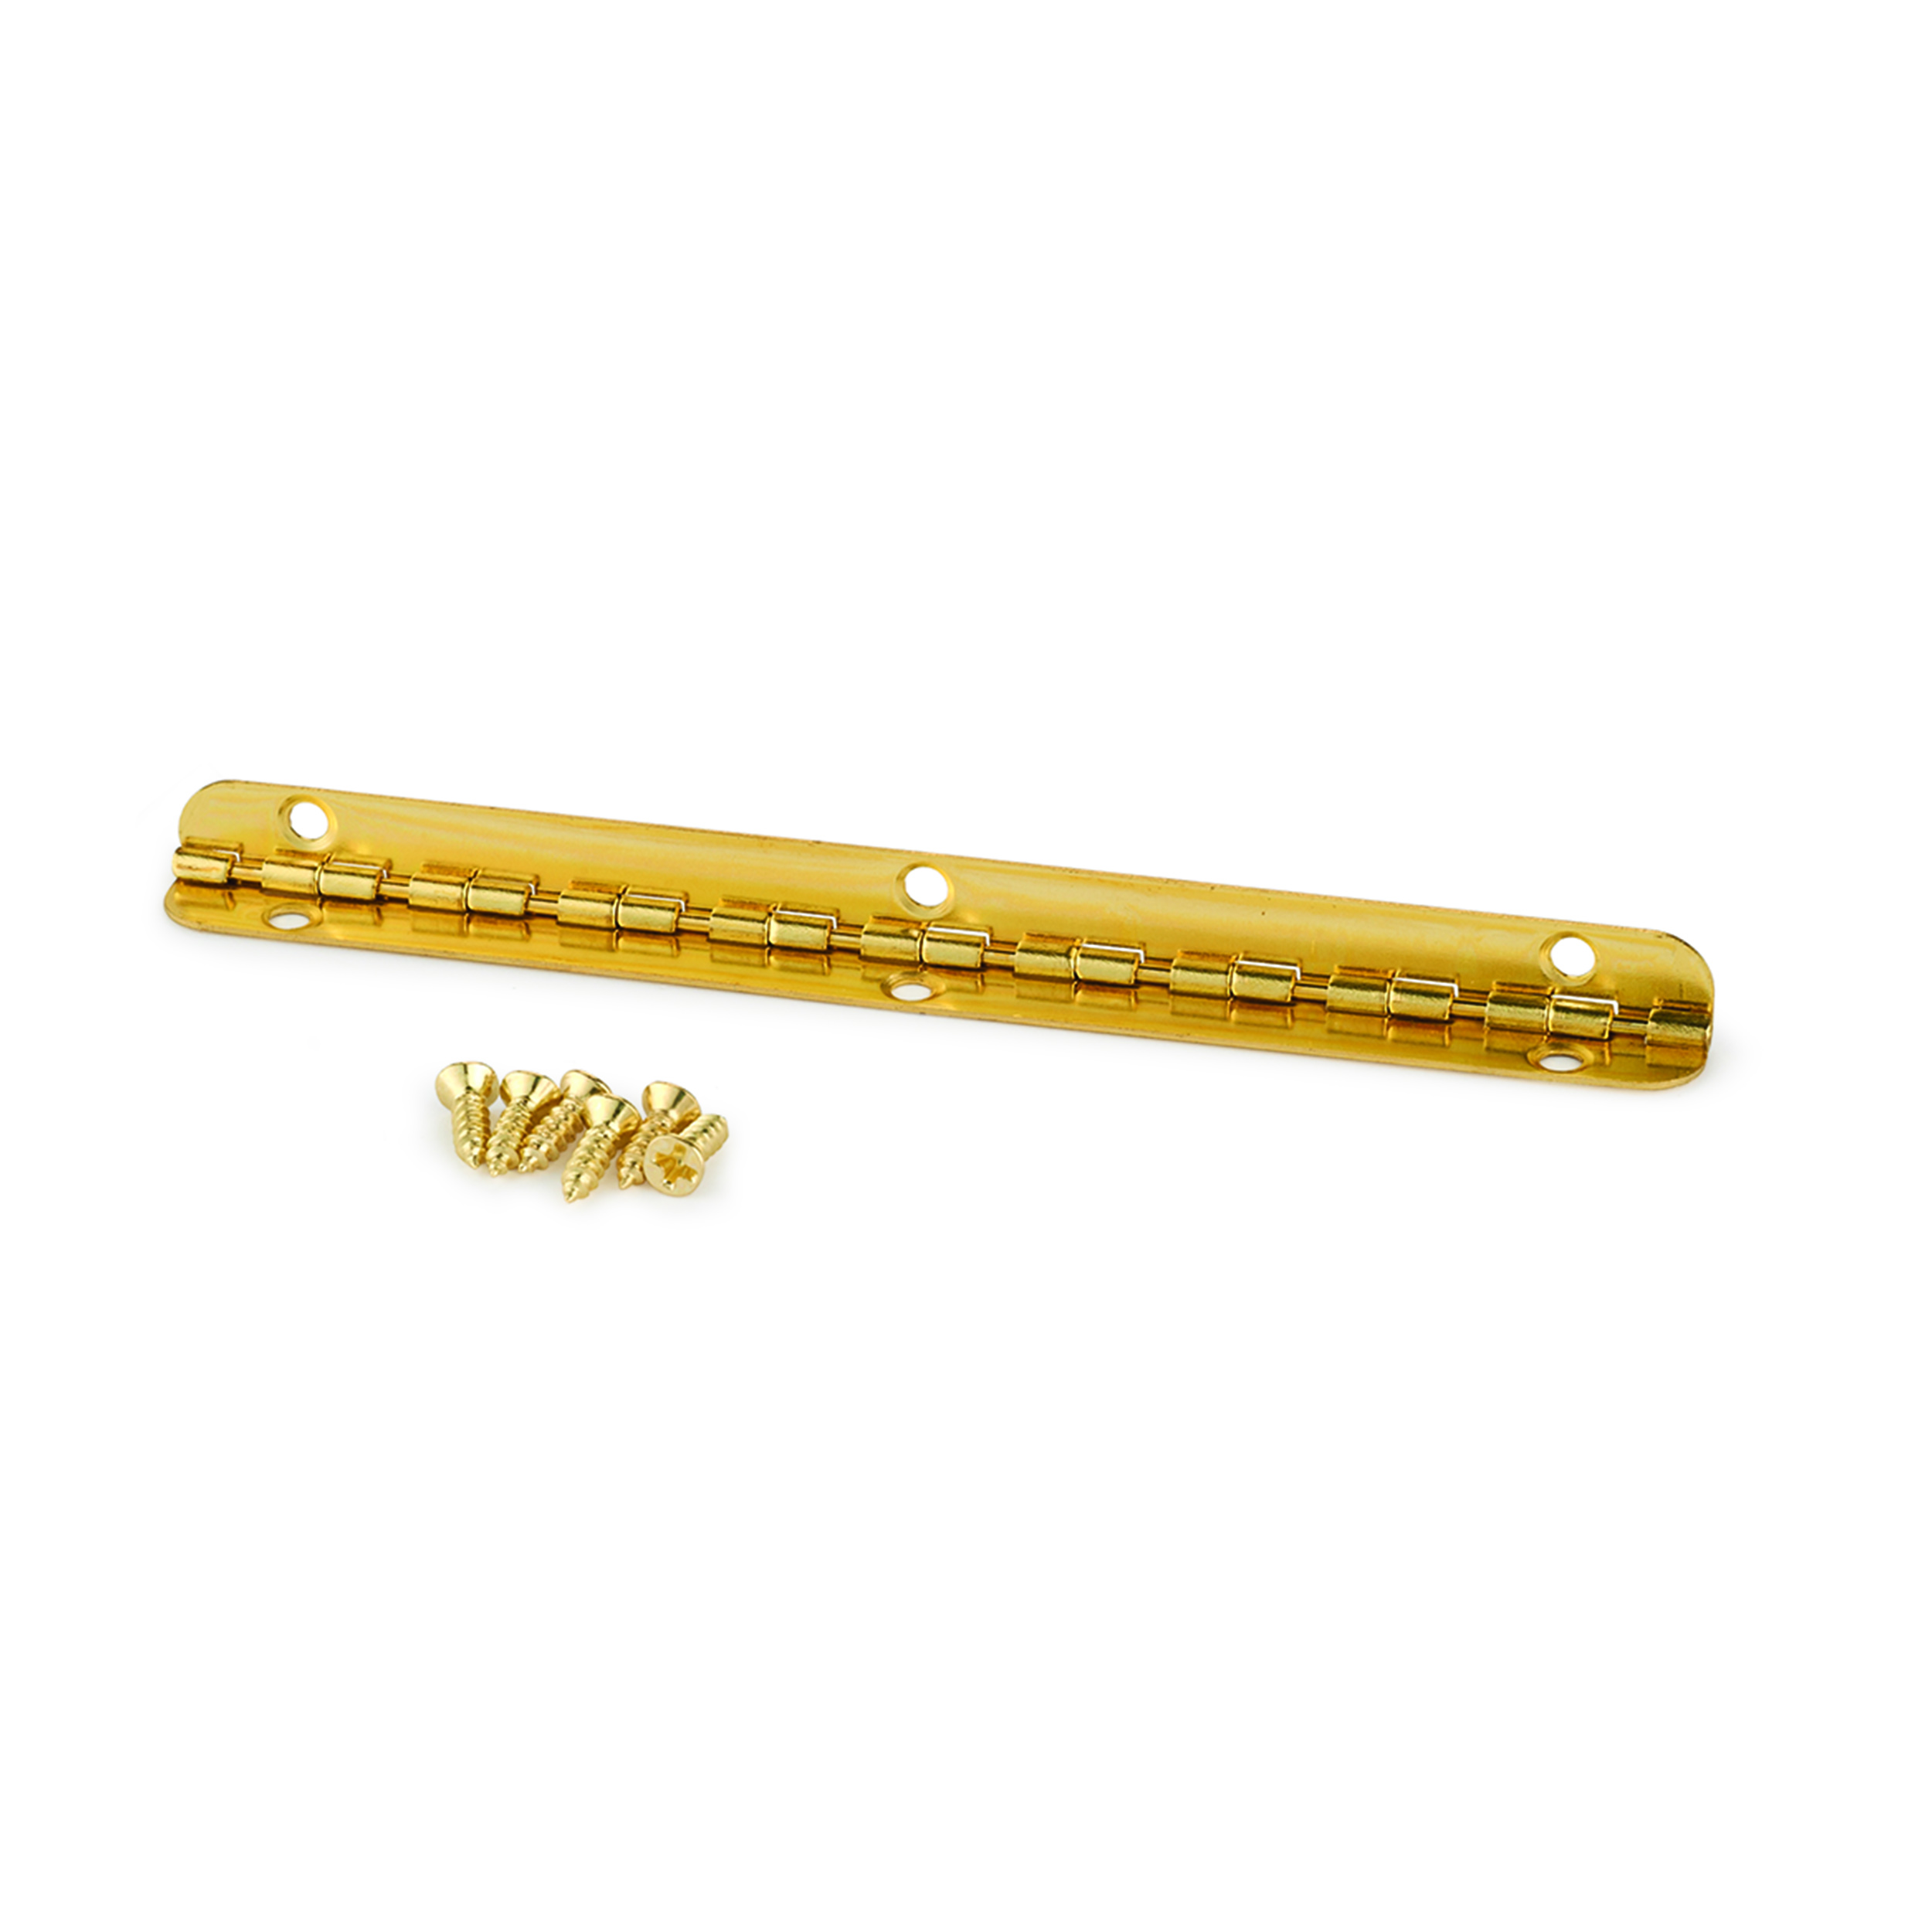 Small Piano Stop Hinge Brass Plated 96mm X 7mm